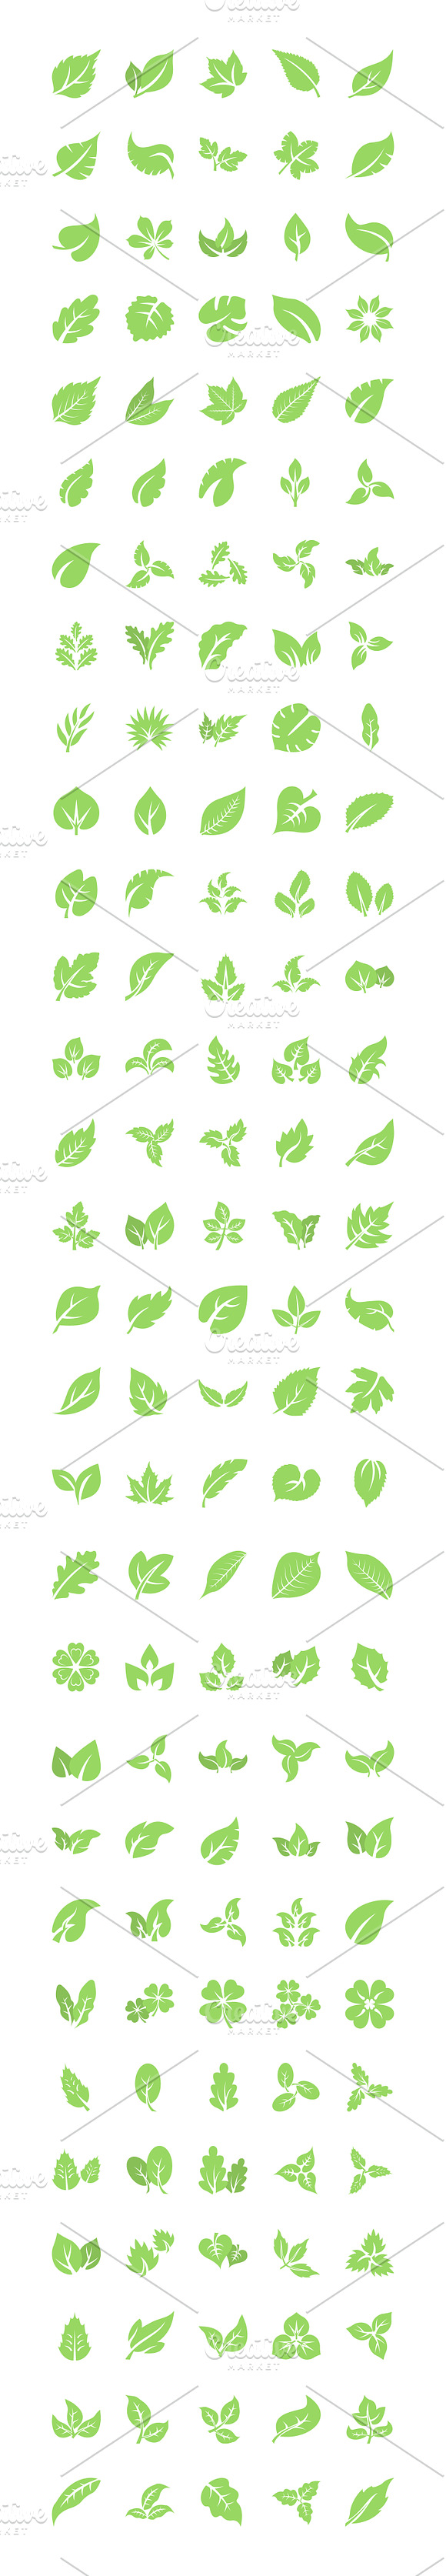 150 Flat Leafs Vector Icons in Icons - product preview 1